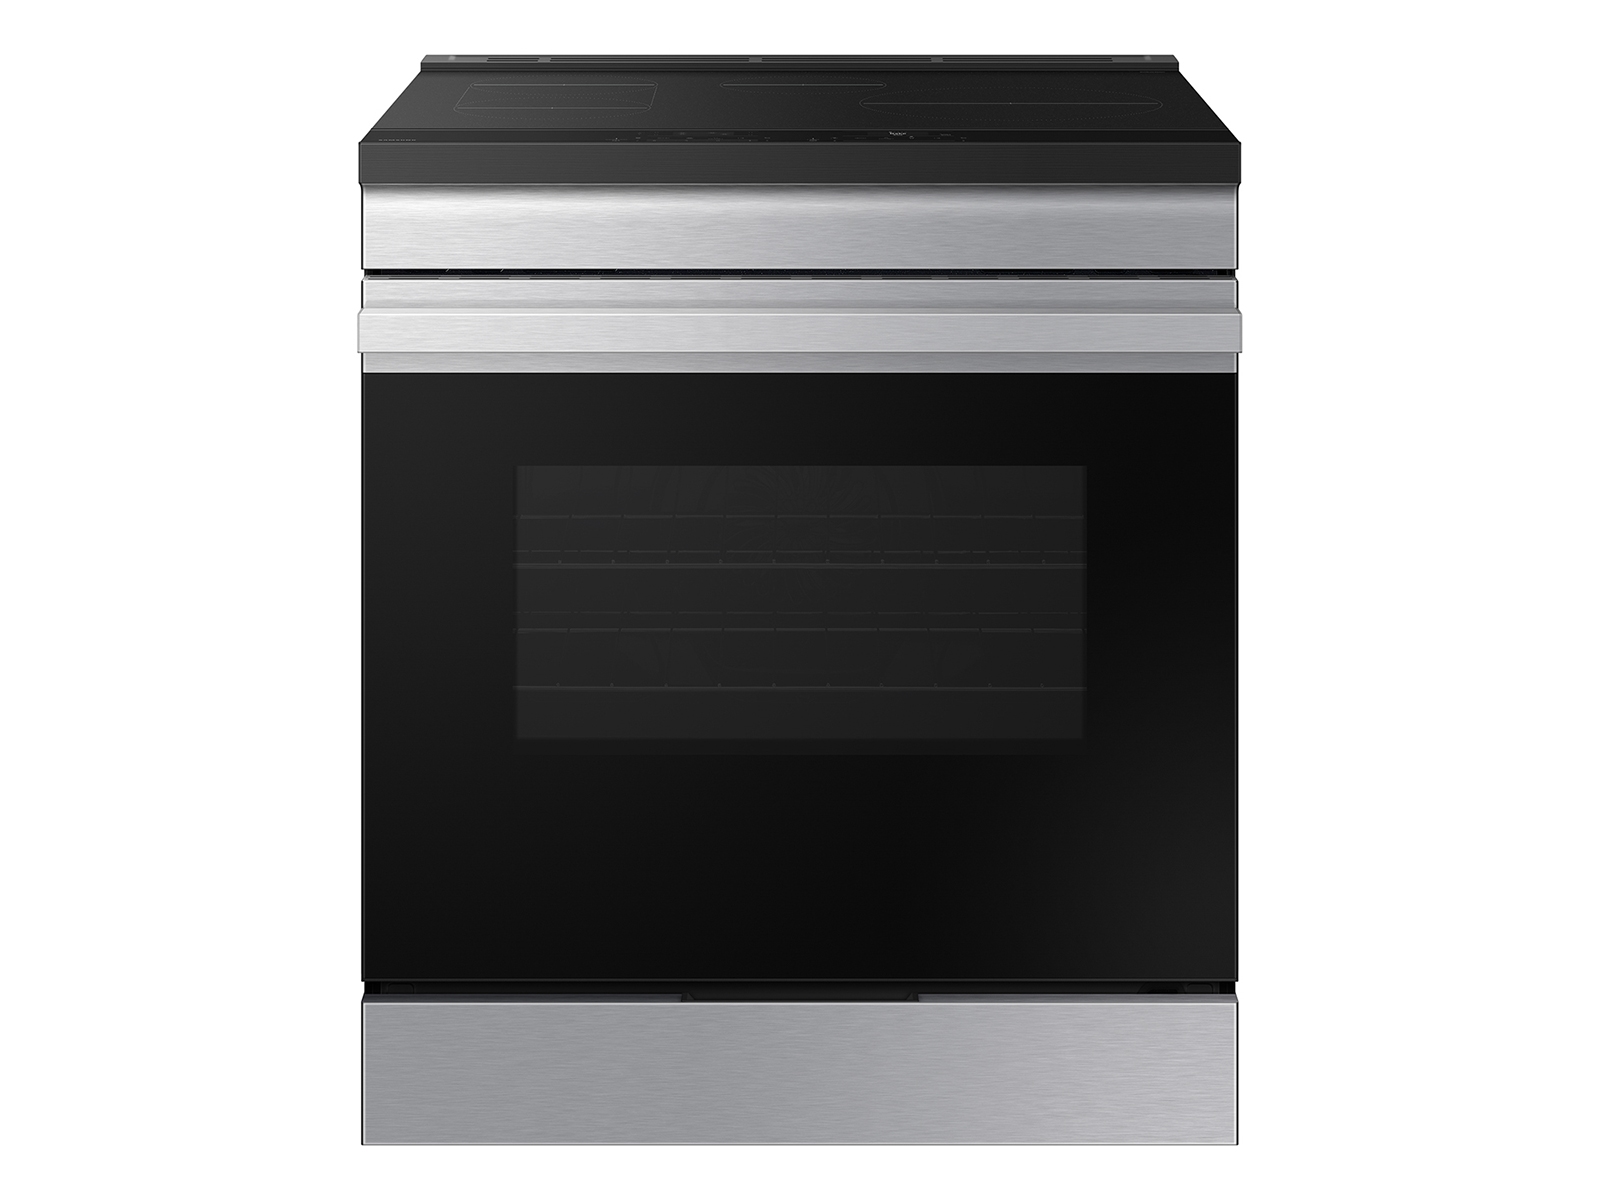 Thumbnail image of Bespoke 6.3 cu. ft. Smart Slide-In Induction Range with Anti-Scratch Glass Cooktop & Air Fry in Stainless Steel